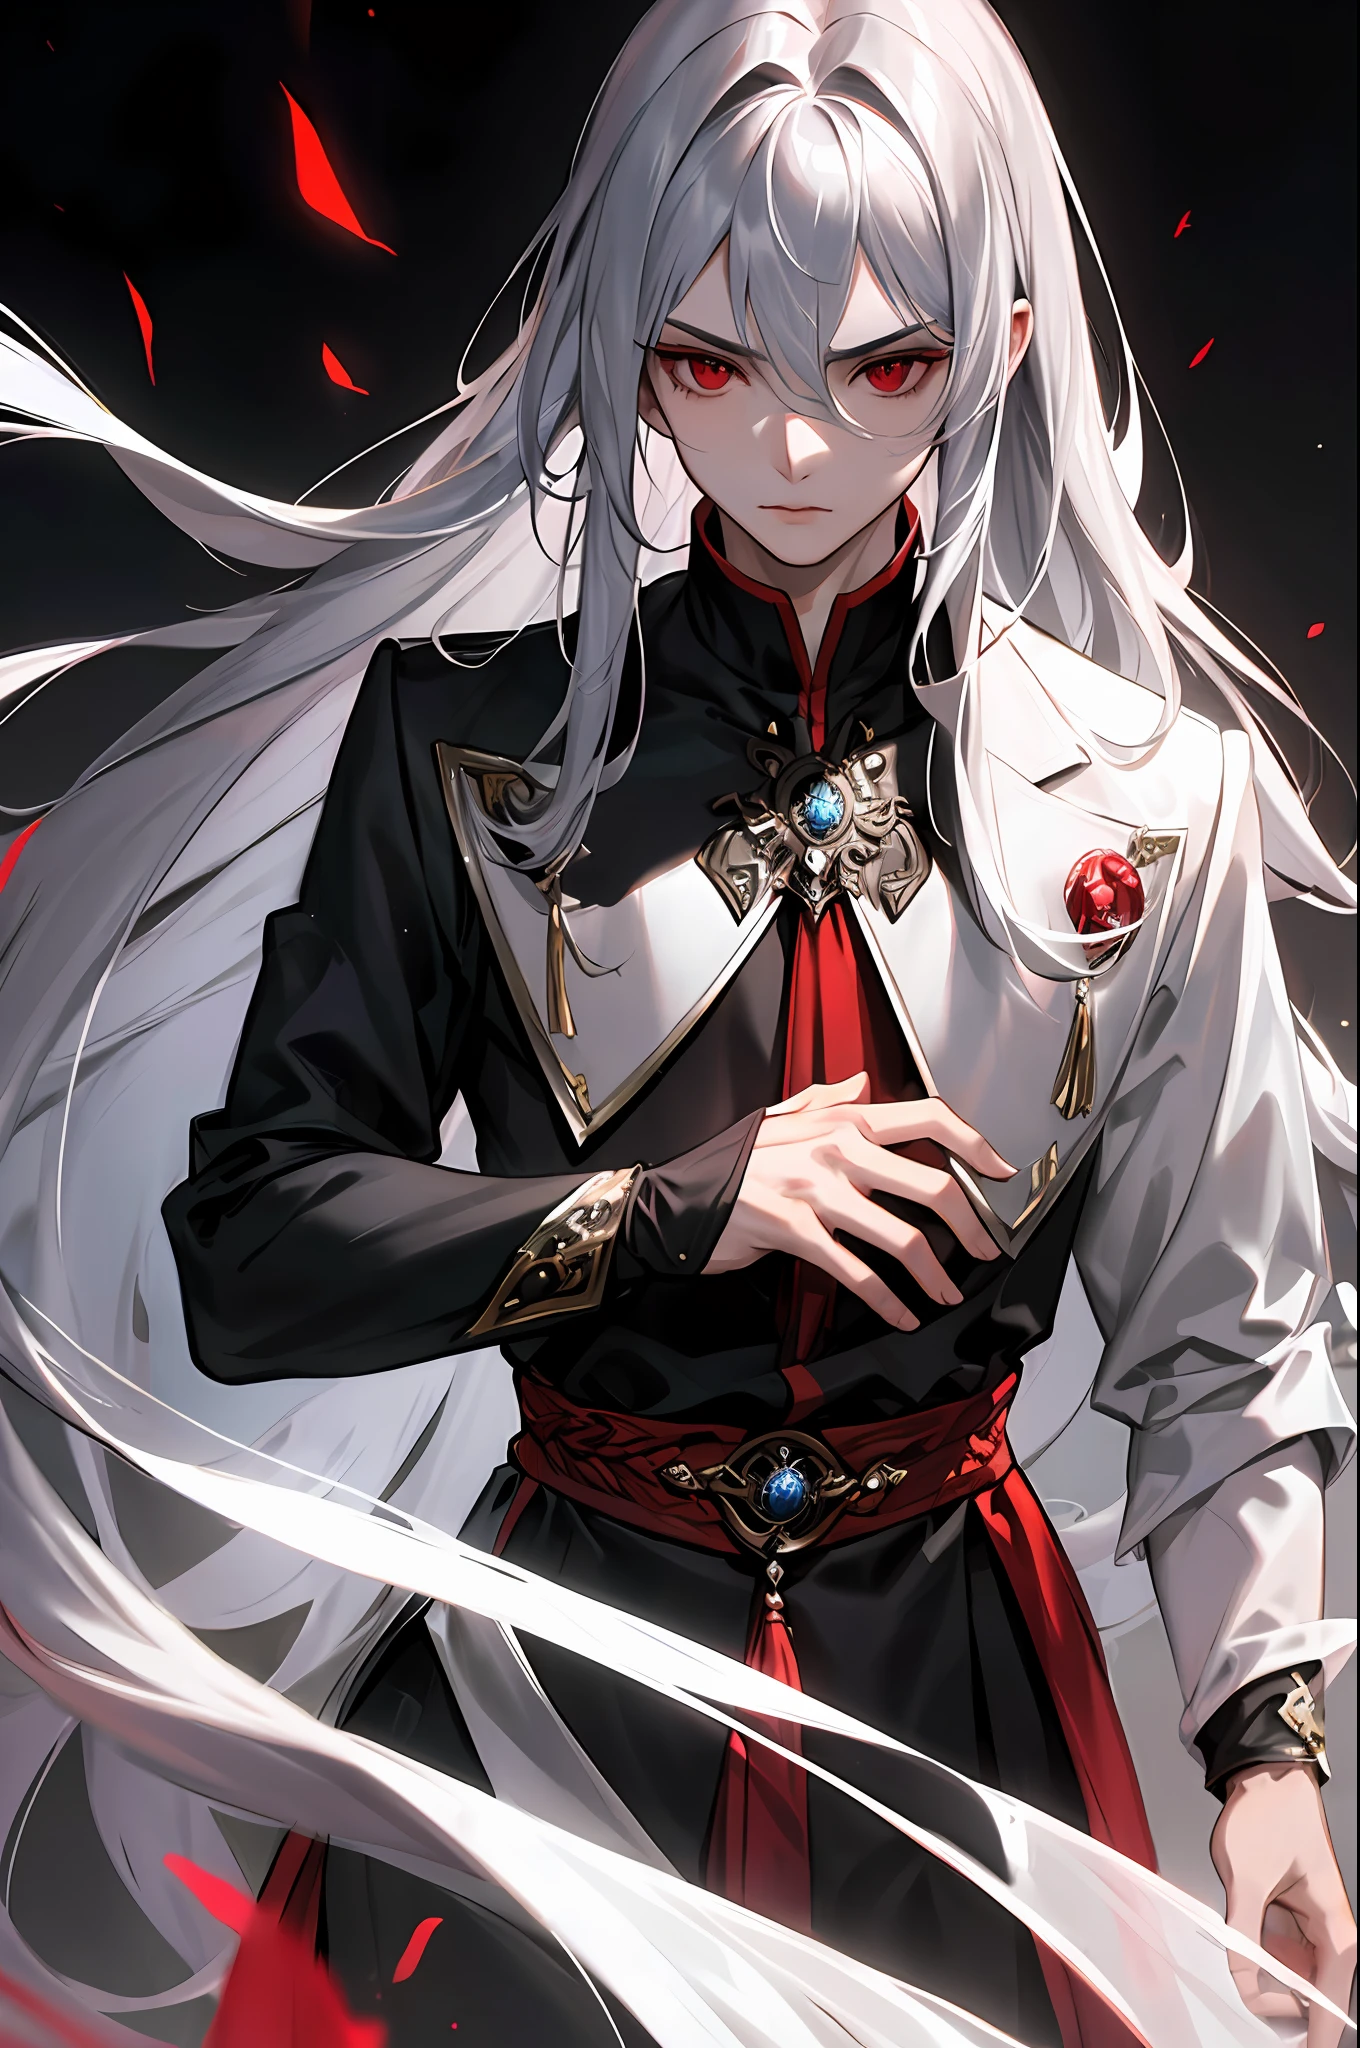 (Best Quality), (Masterpiece), Male, Long Hair, Silver Hair, Red Eyes, Mature Philosopher, Serious, Intricate Clothing, Messy Hairstyle, Deep Scene, Dynamic Light Source.